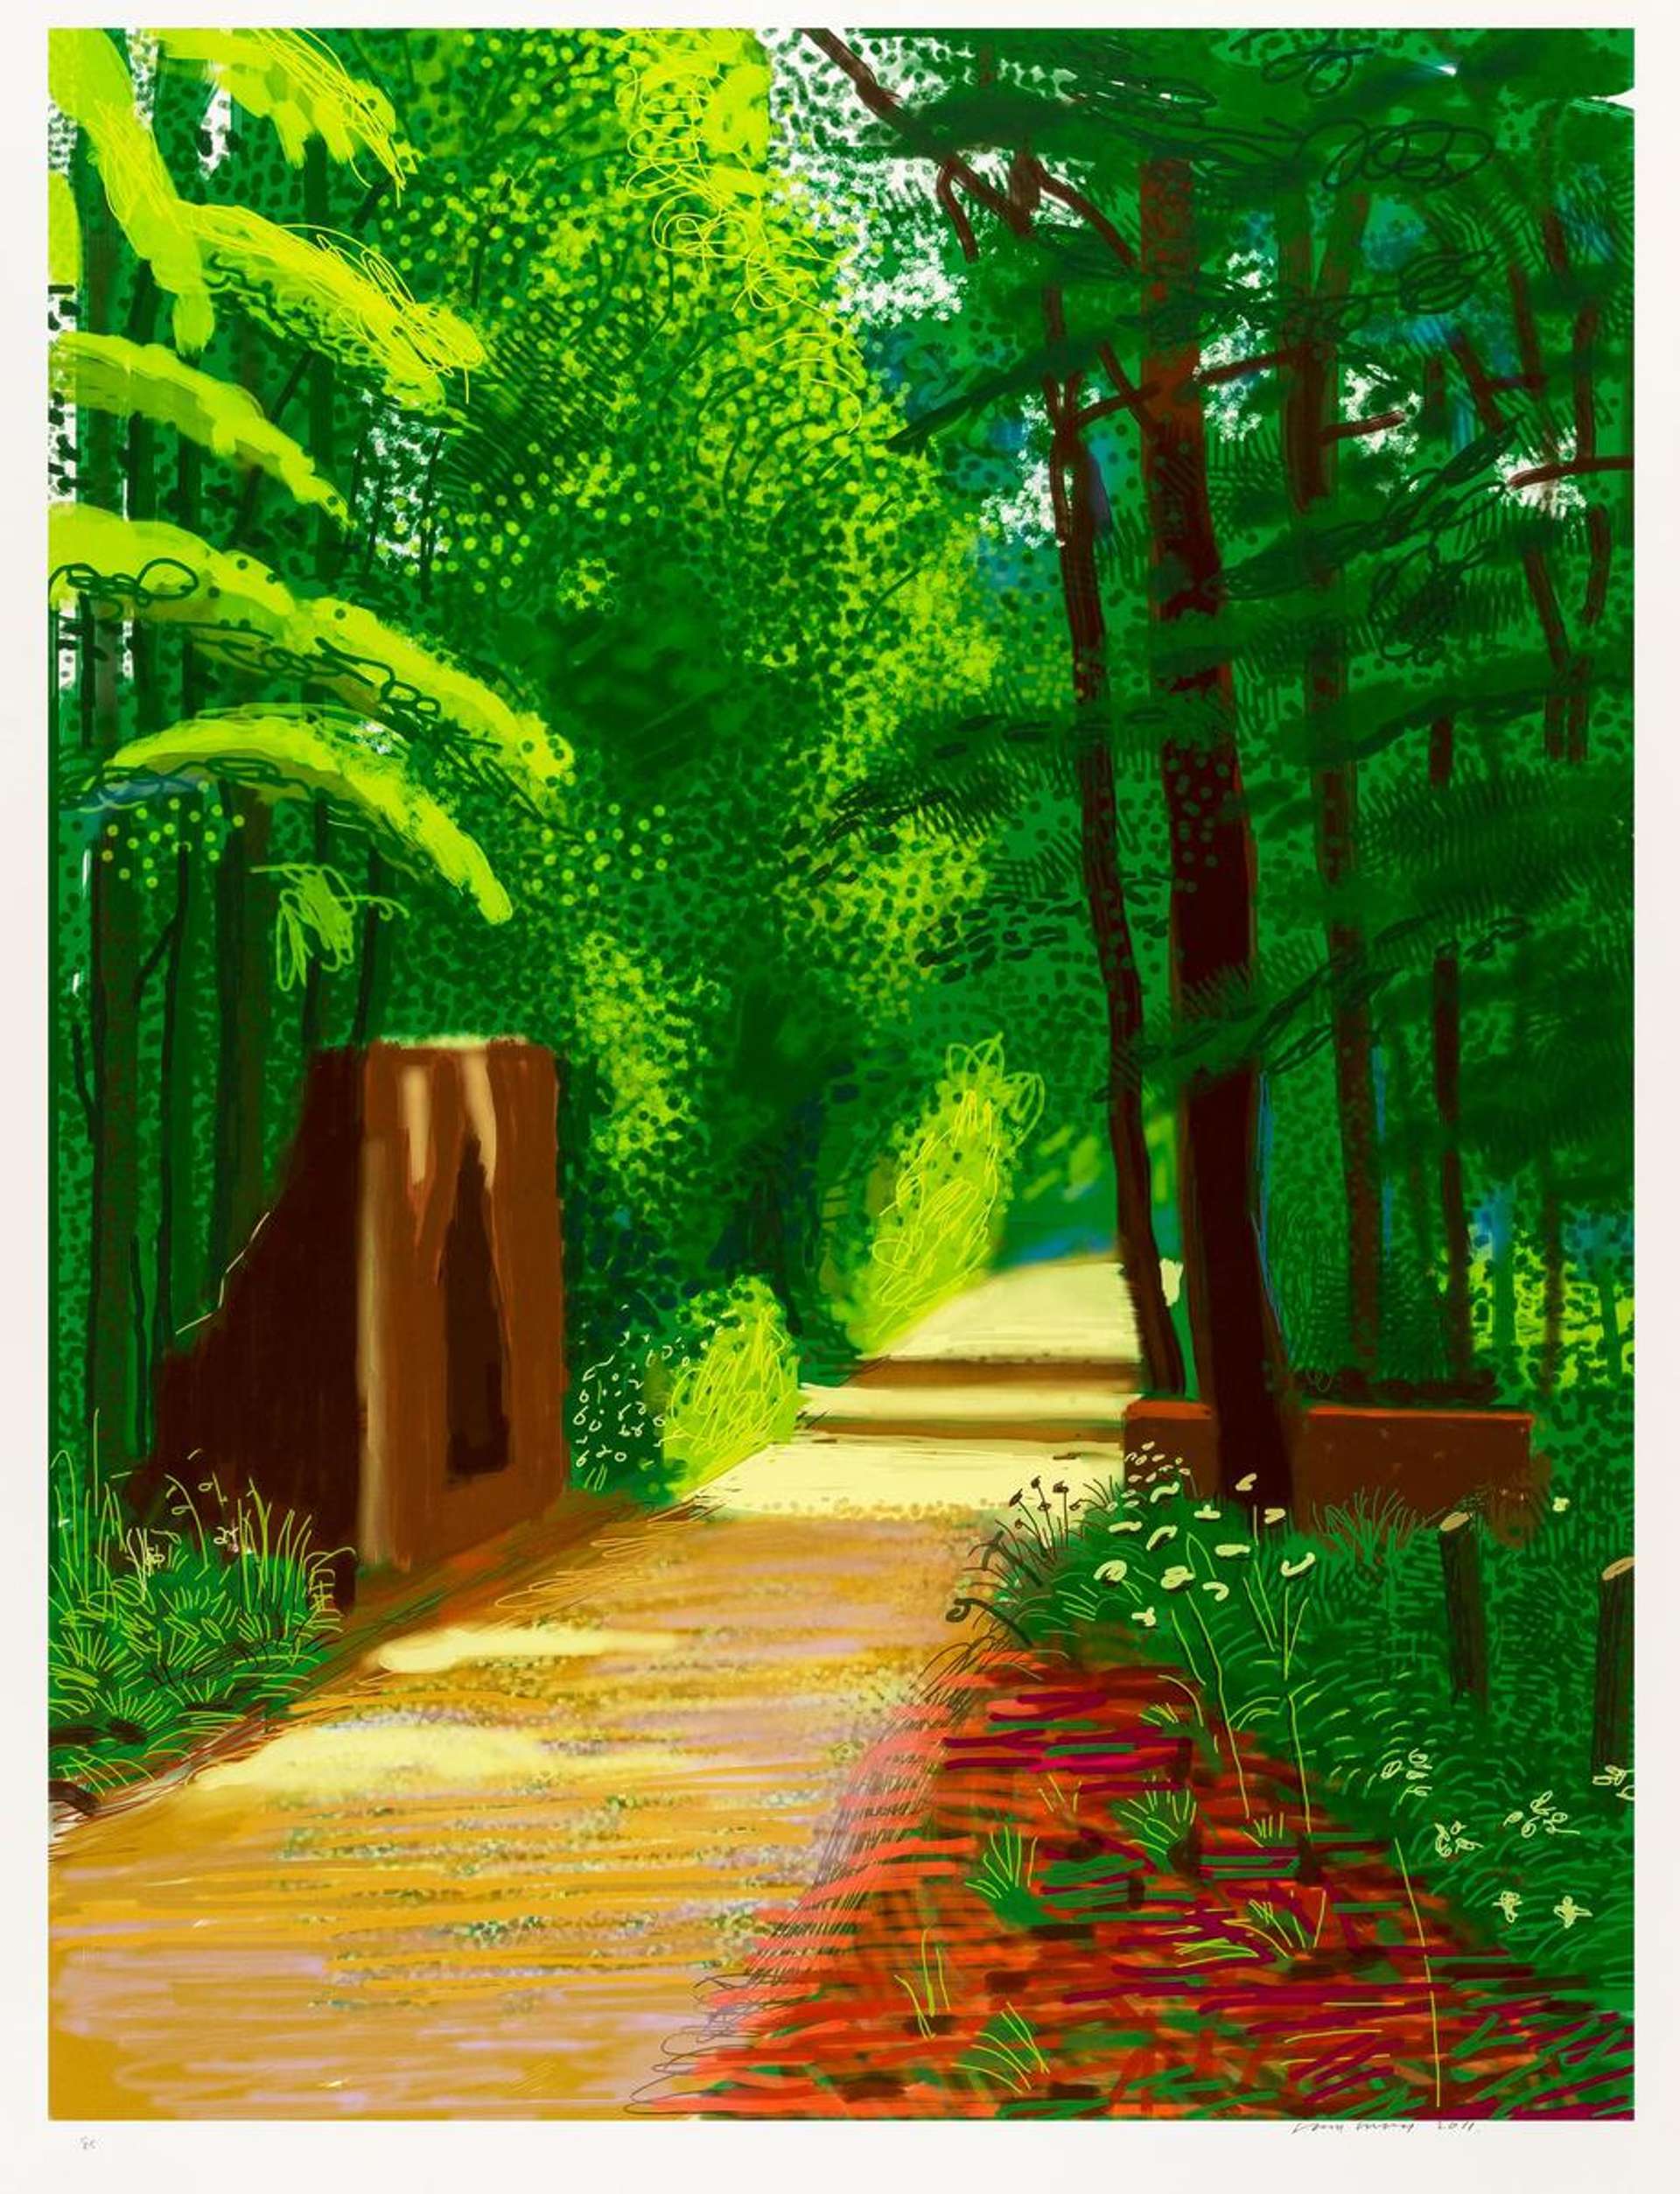 Print Series to Watch: David Hockney's The Arrival of Spring